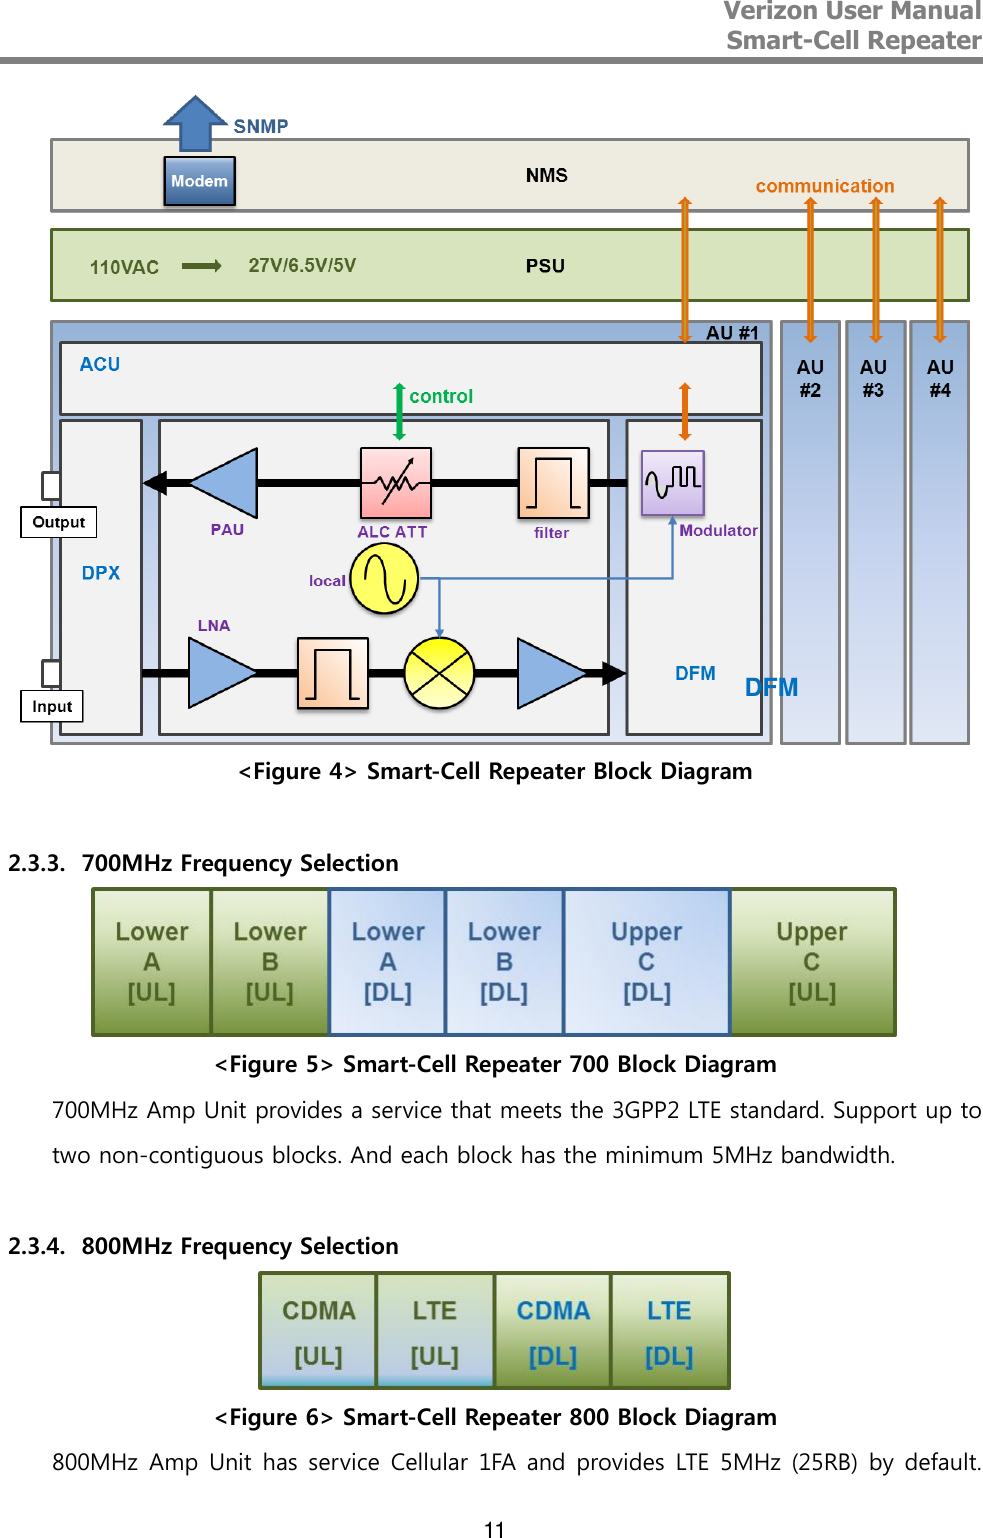 Verizon User Manual  Smart-Cell Repeater   11  &lt;Figure 4&gt; Smart-Cell Repeater Block Diagram  2.3.3. 700MHz Frequency Selection  &lt;Figure 5&gt; Smart-Cell Repeater 700 Block Diagram 700MHz Amp Unit provides a service that meets the 3GPP2 LTE standard. Support up to two non-contiguous blocks. And each block has the minimum 5MHz bandwidth.  2.3.4. 800MHz Frequency Selection  &lt;Figure 6&gt; Smart-Cell Repeater 800 Block Diagram 800MHz Amp Unit has service Cellular 1FA  and provides LTE 5MHz (25RB) by default.   ADC    DFM 